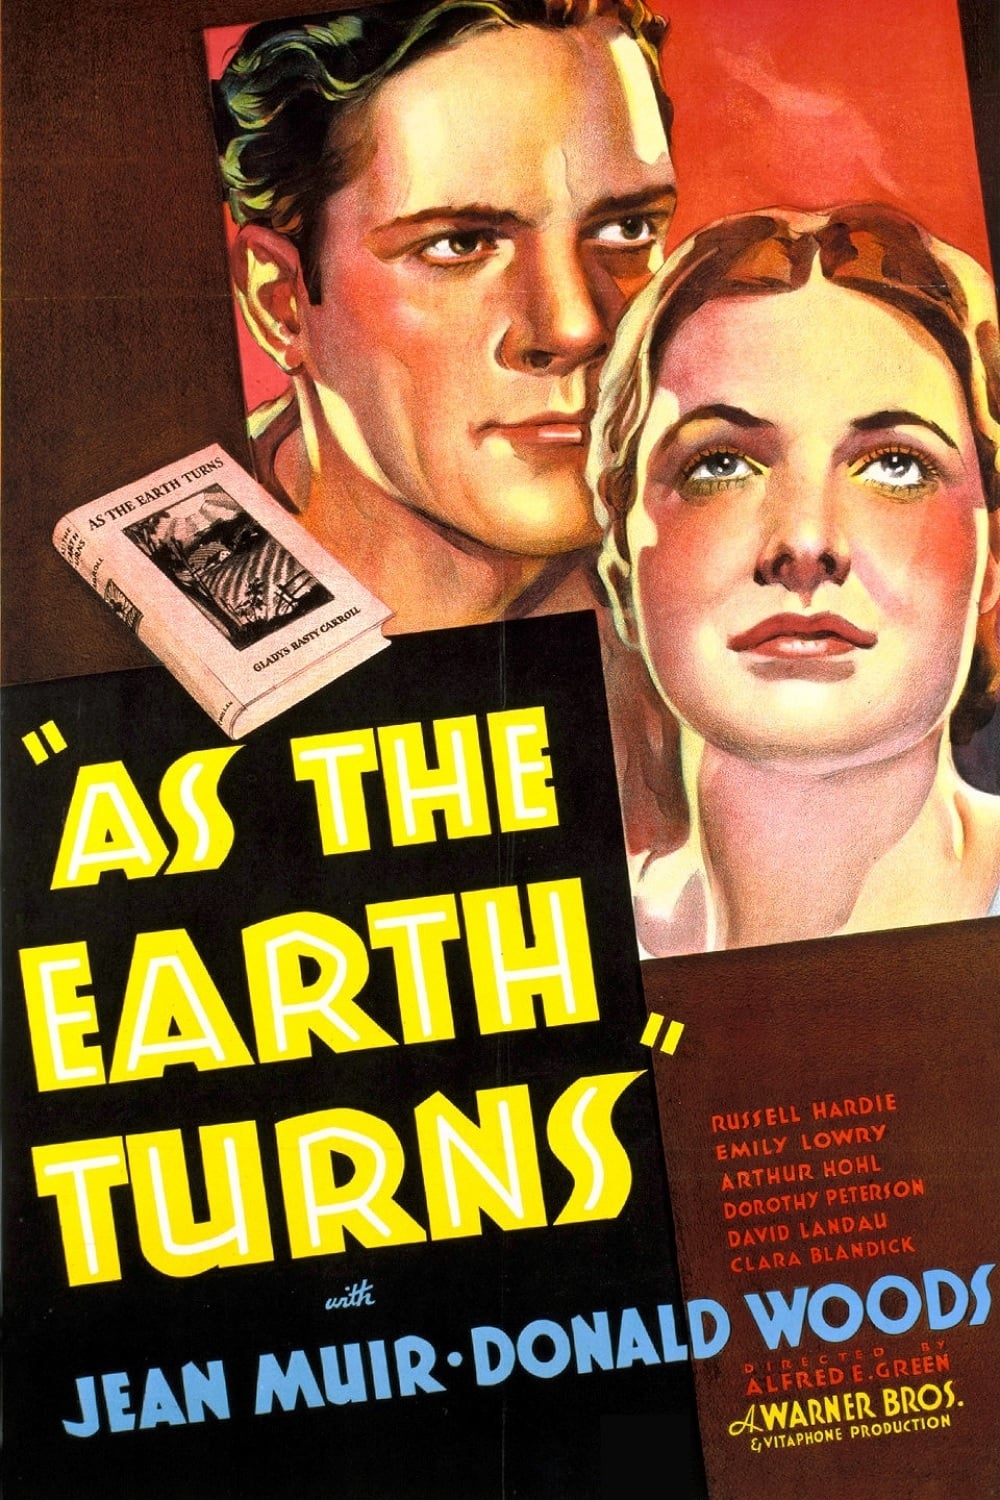 As the Earth Turns (1934)